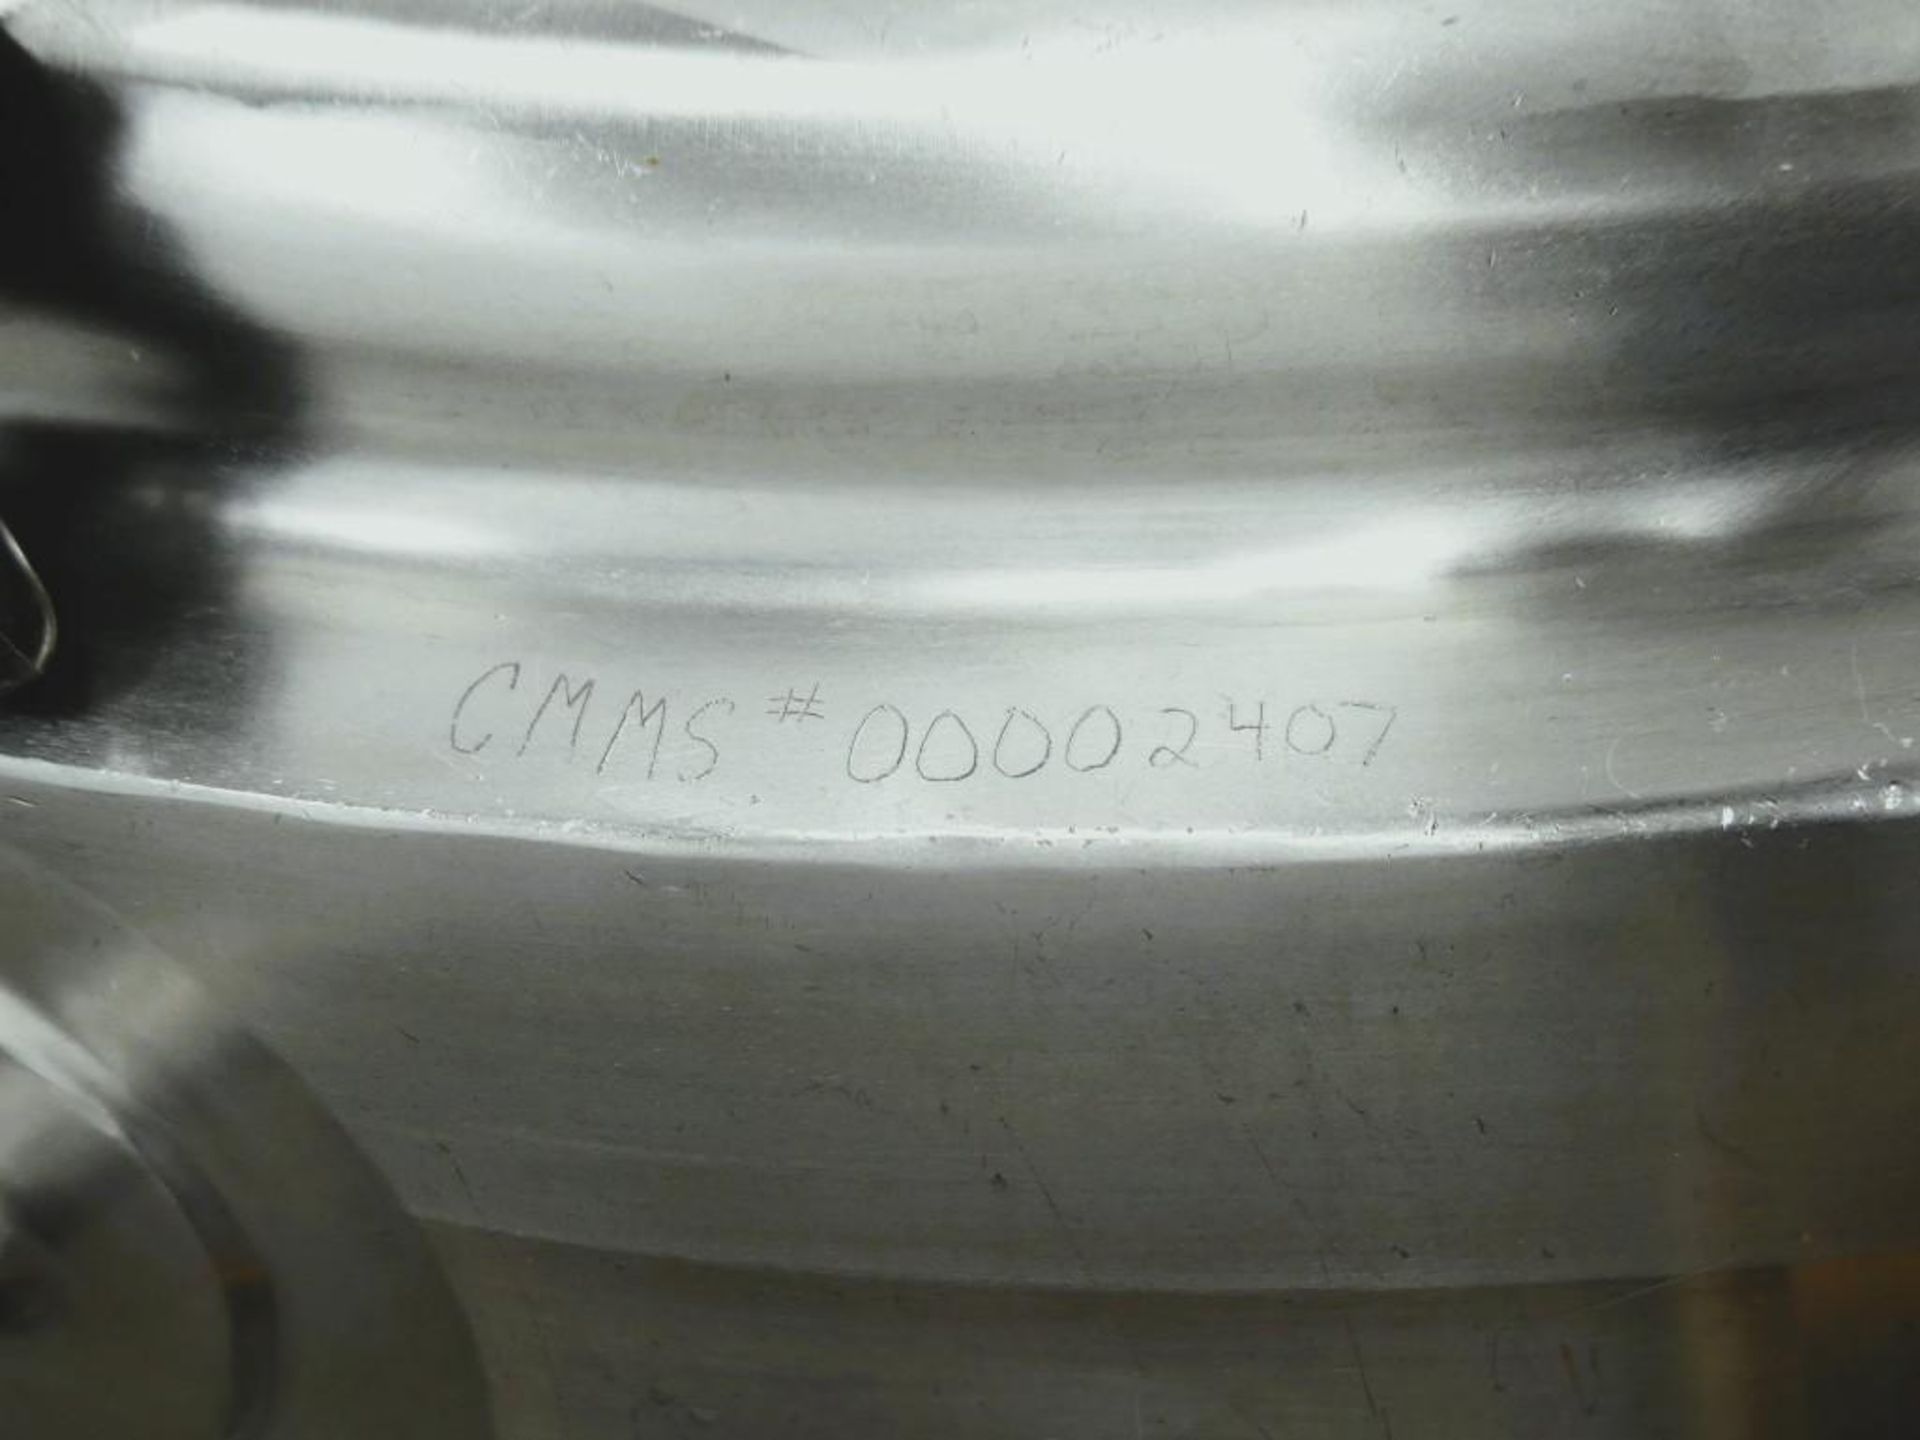 Lee 85 Gallon Stainless Steel Jacketed Kettle - Image 21 of 31